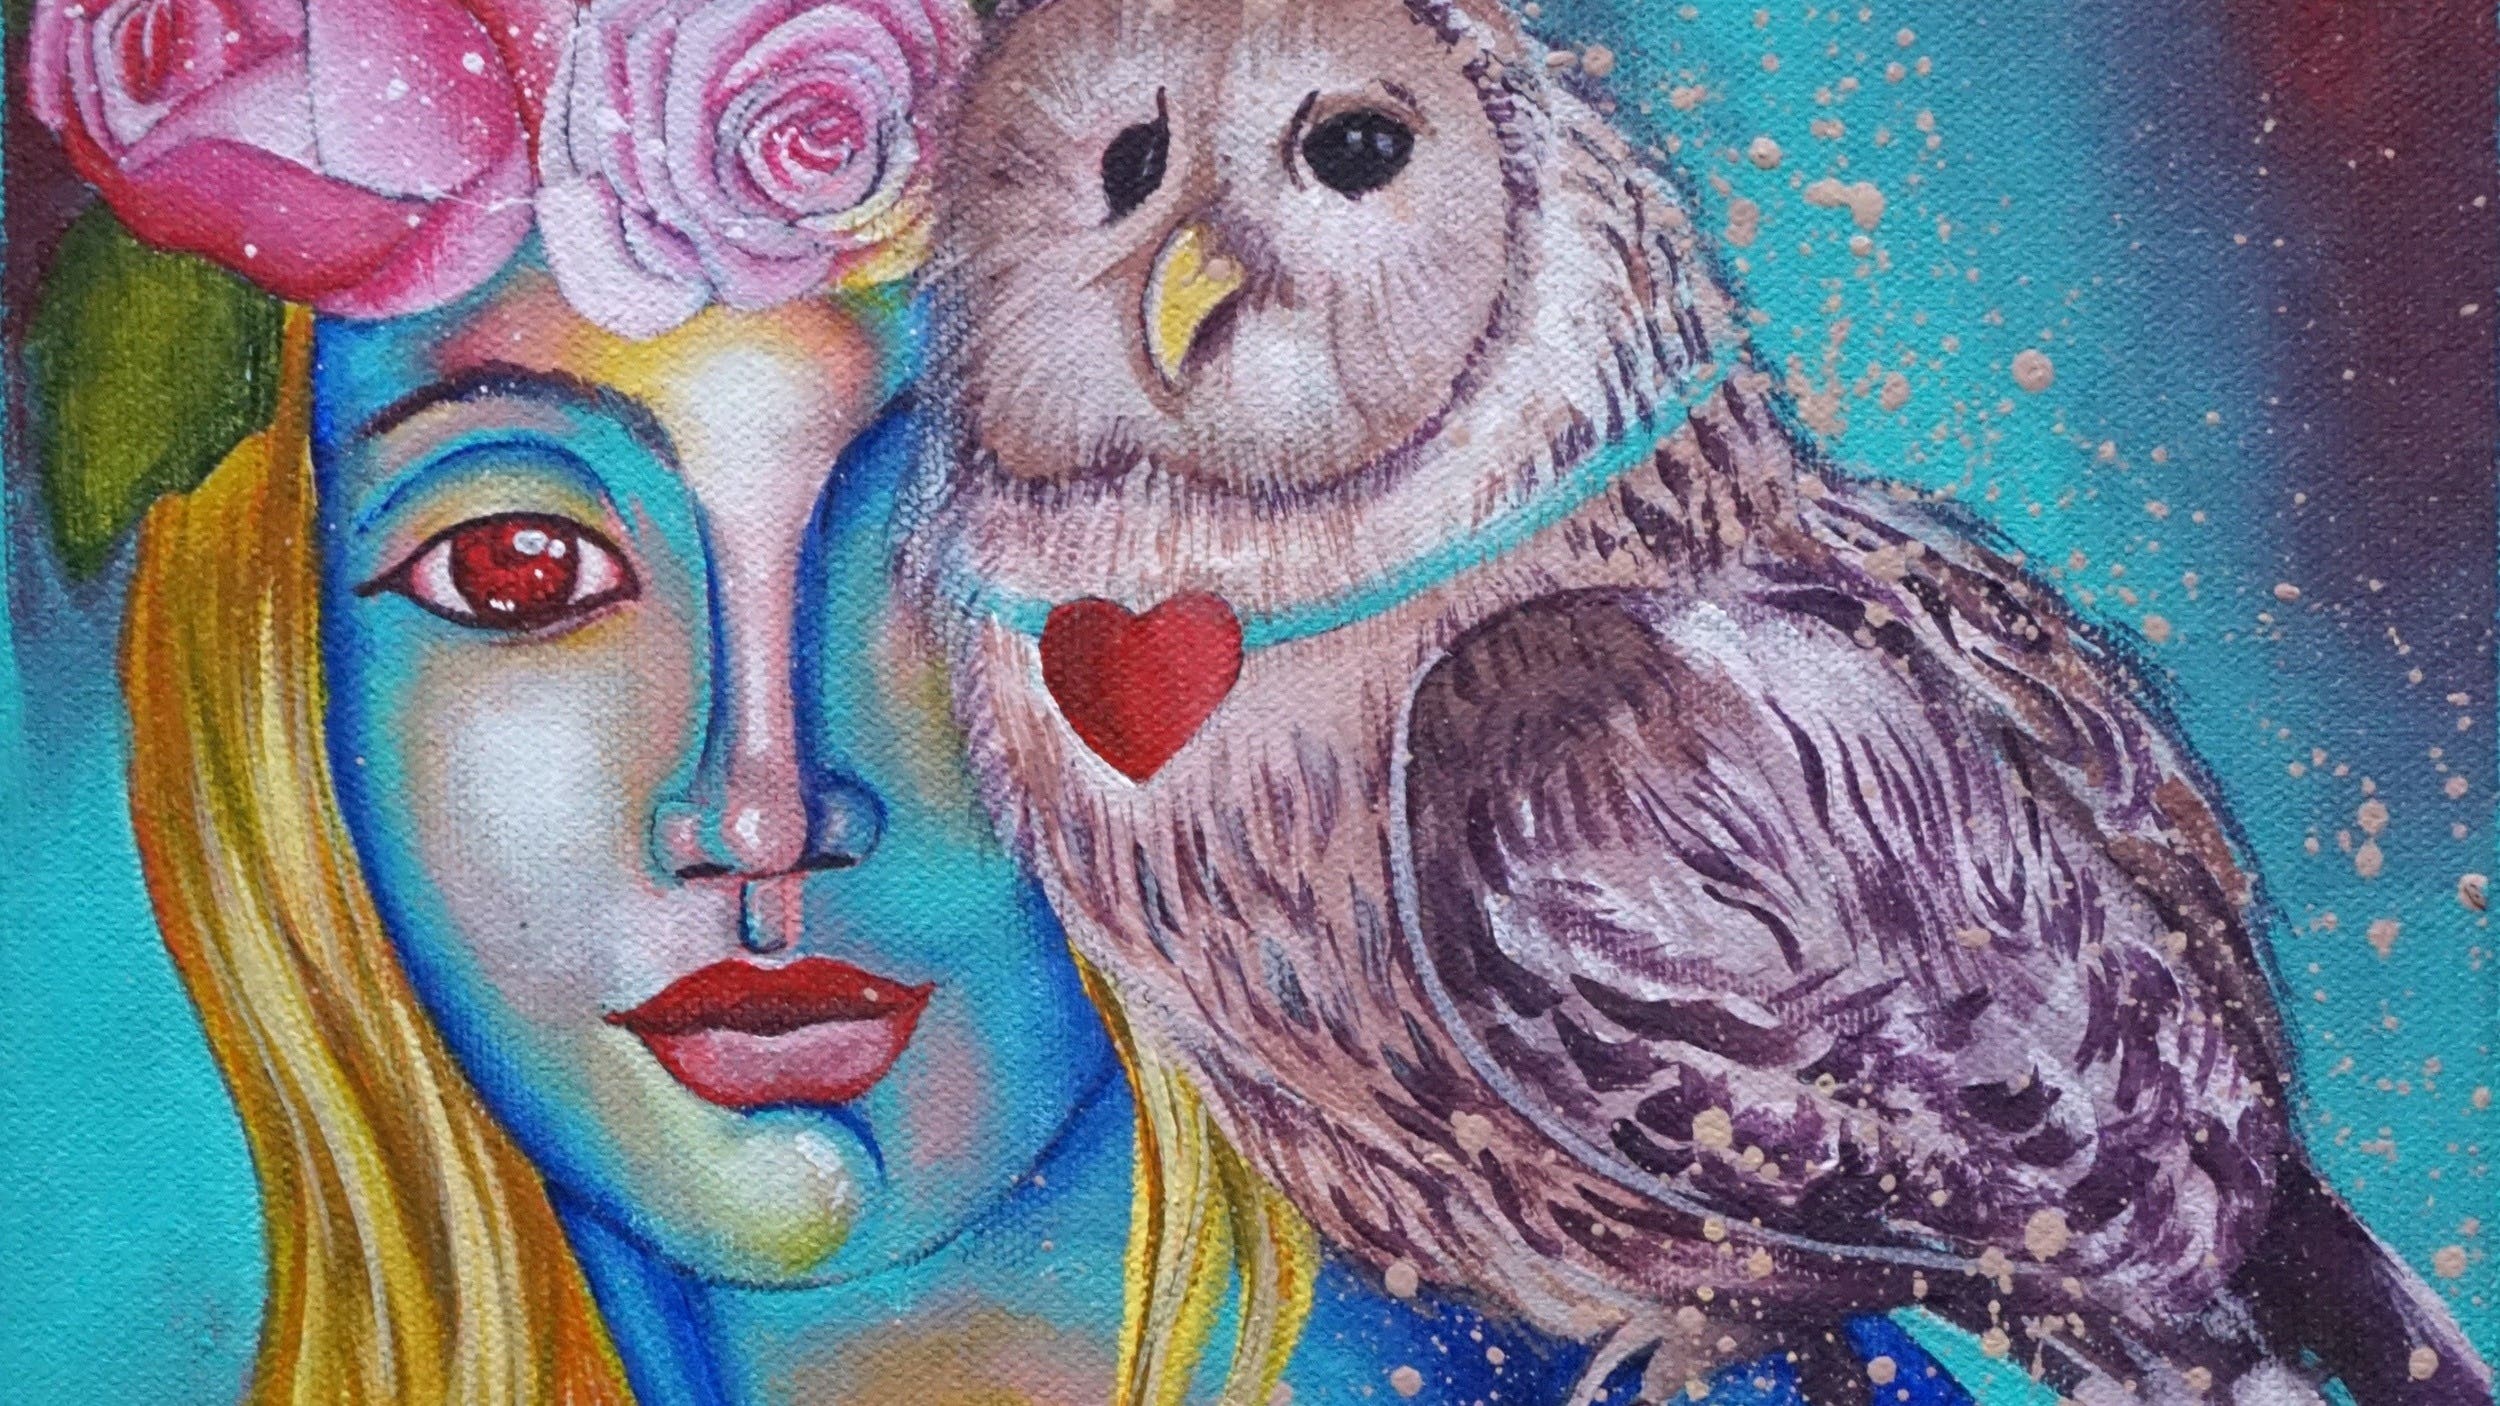 Unleash Your Inner Artist: Learn How to Paint a Girl with an Owl - A Step-by-Step Acrylic Painting Workshop on Canvas